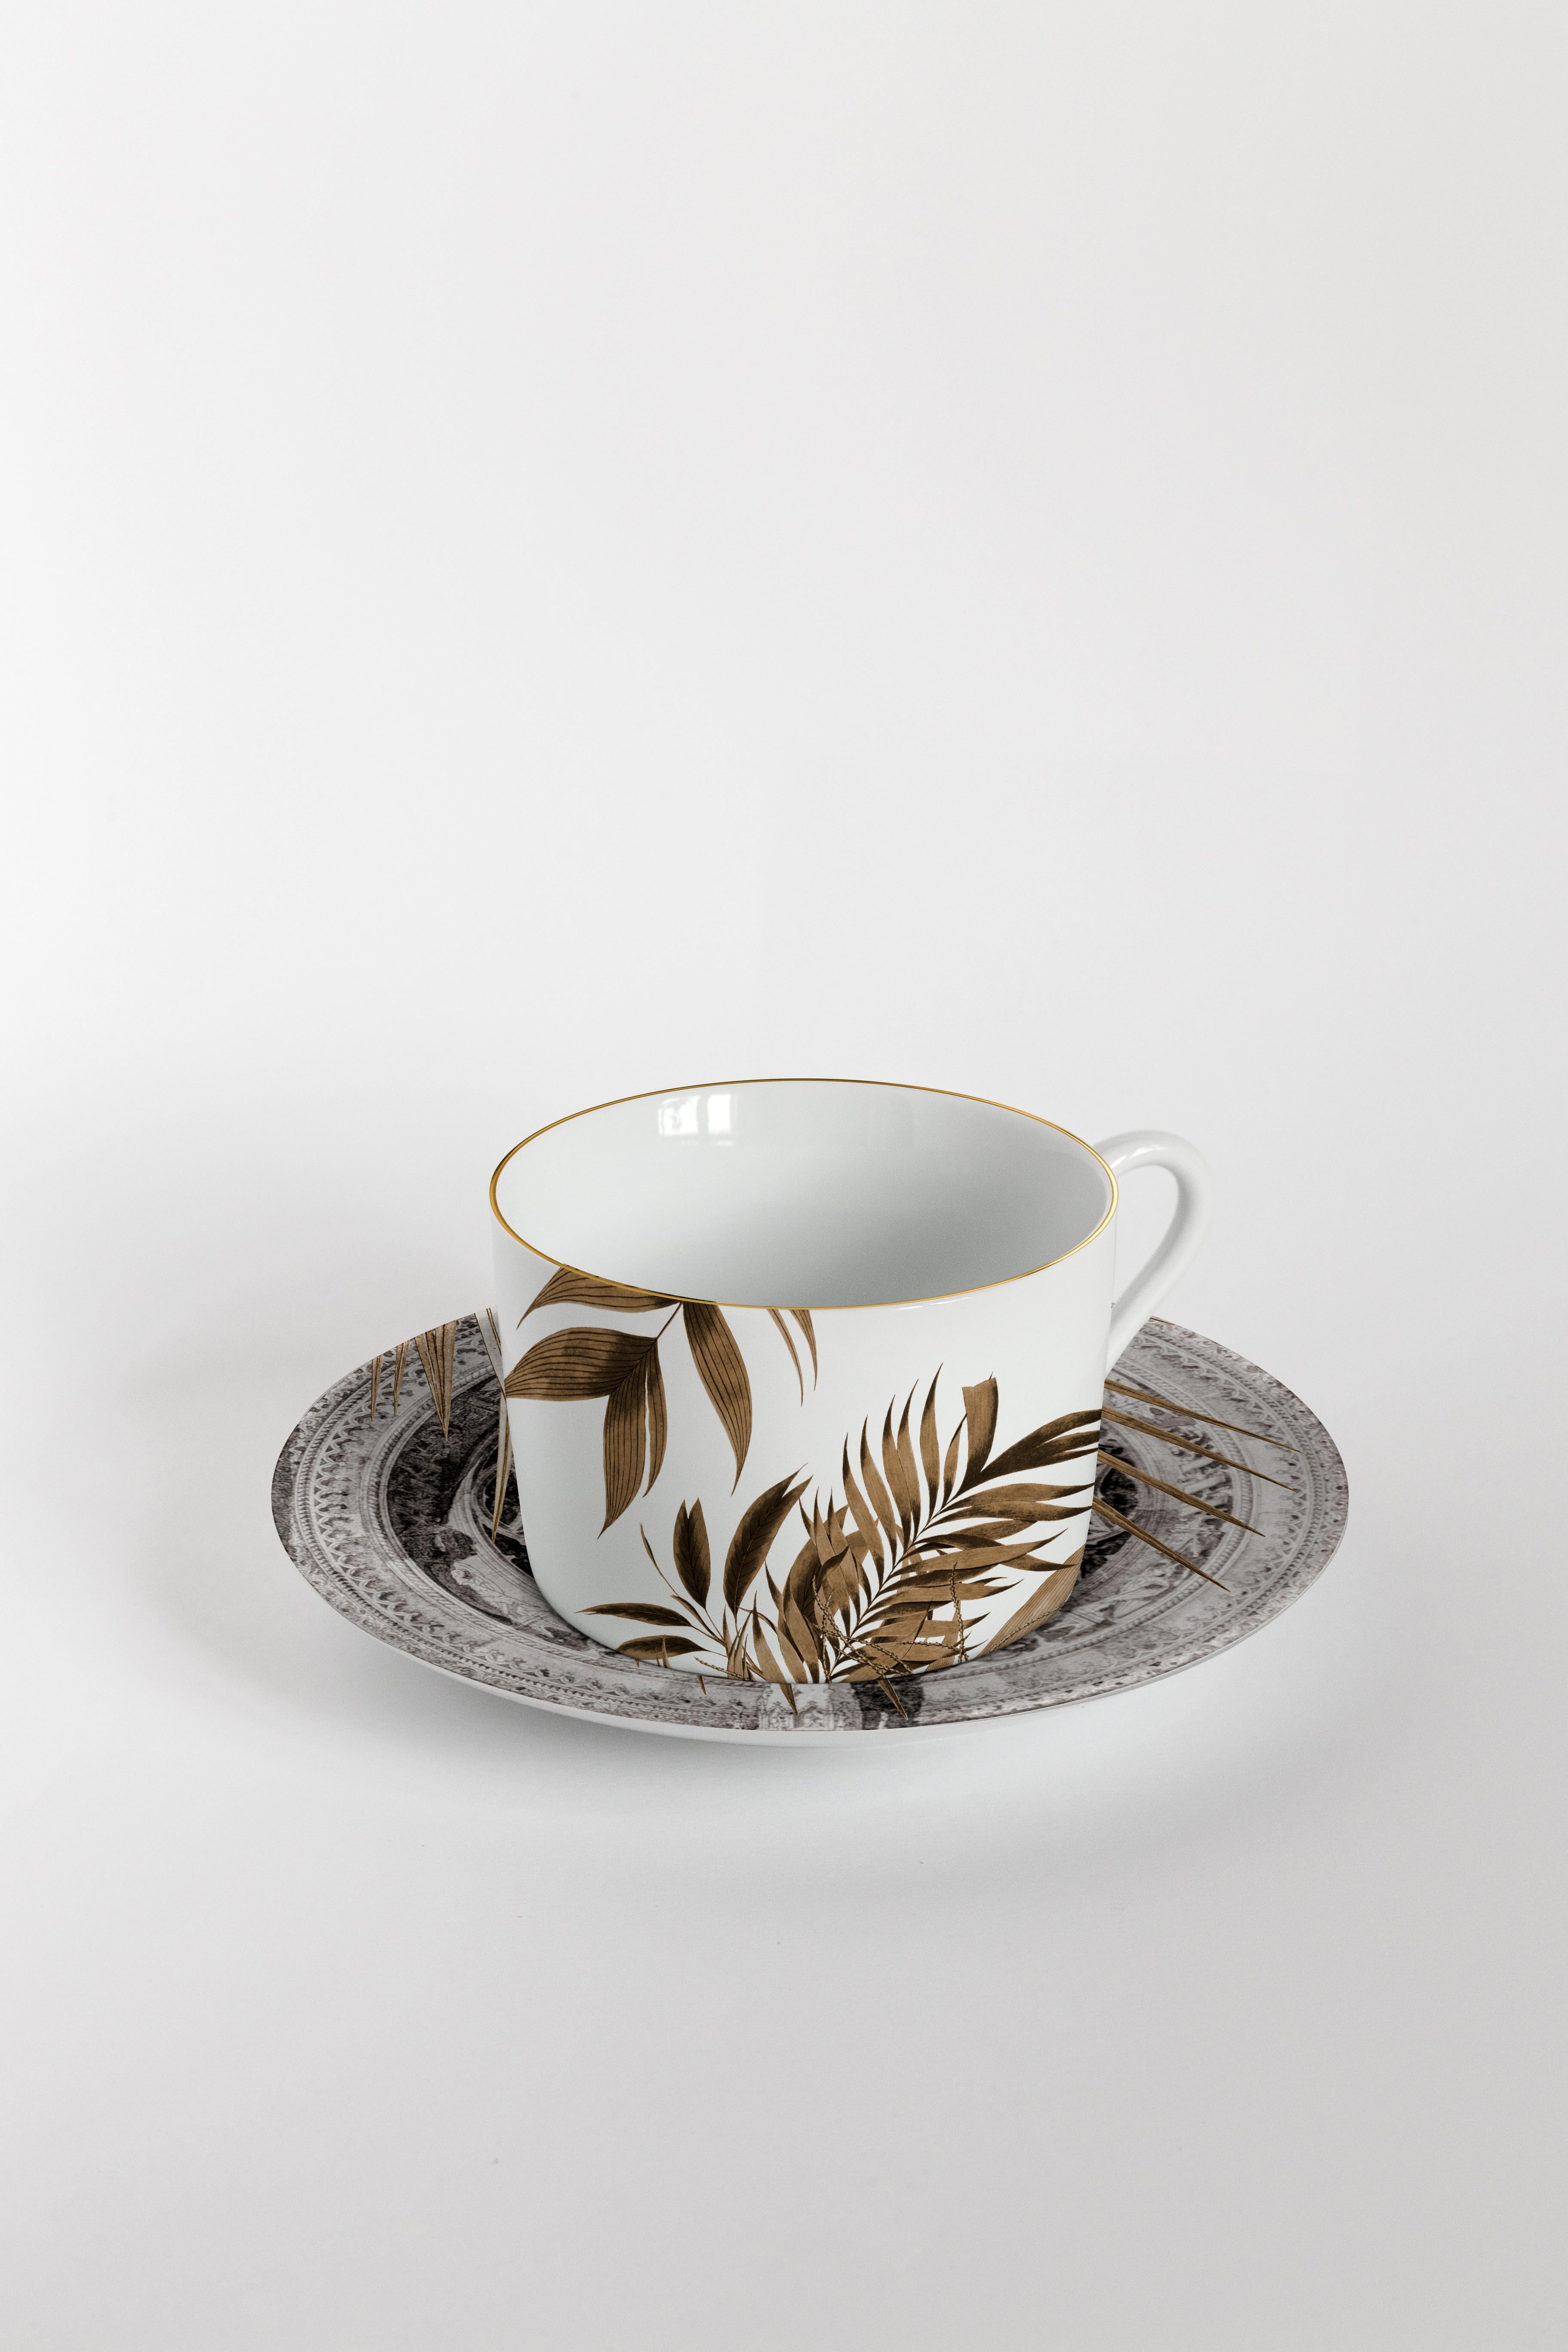 From the encounter between the historical archives of the Duomo di Milano and the imagery of Grand Tour by Vito Nesta, this unique collections of porcelains and fabrics were born. “Il Duomo che Non c’e” collects a selection of the most evocative